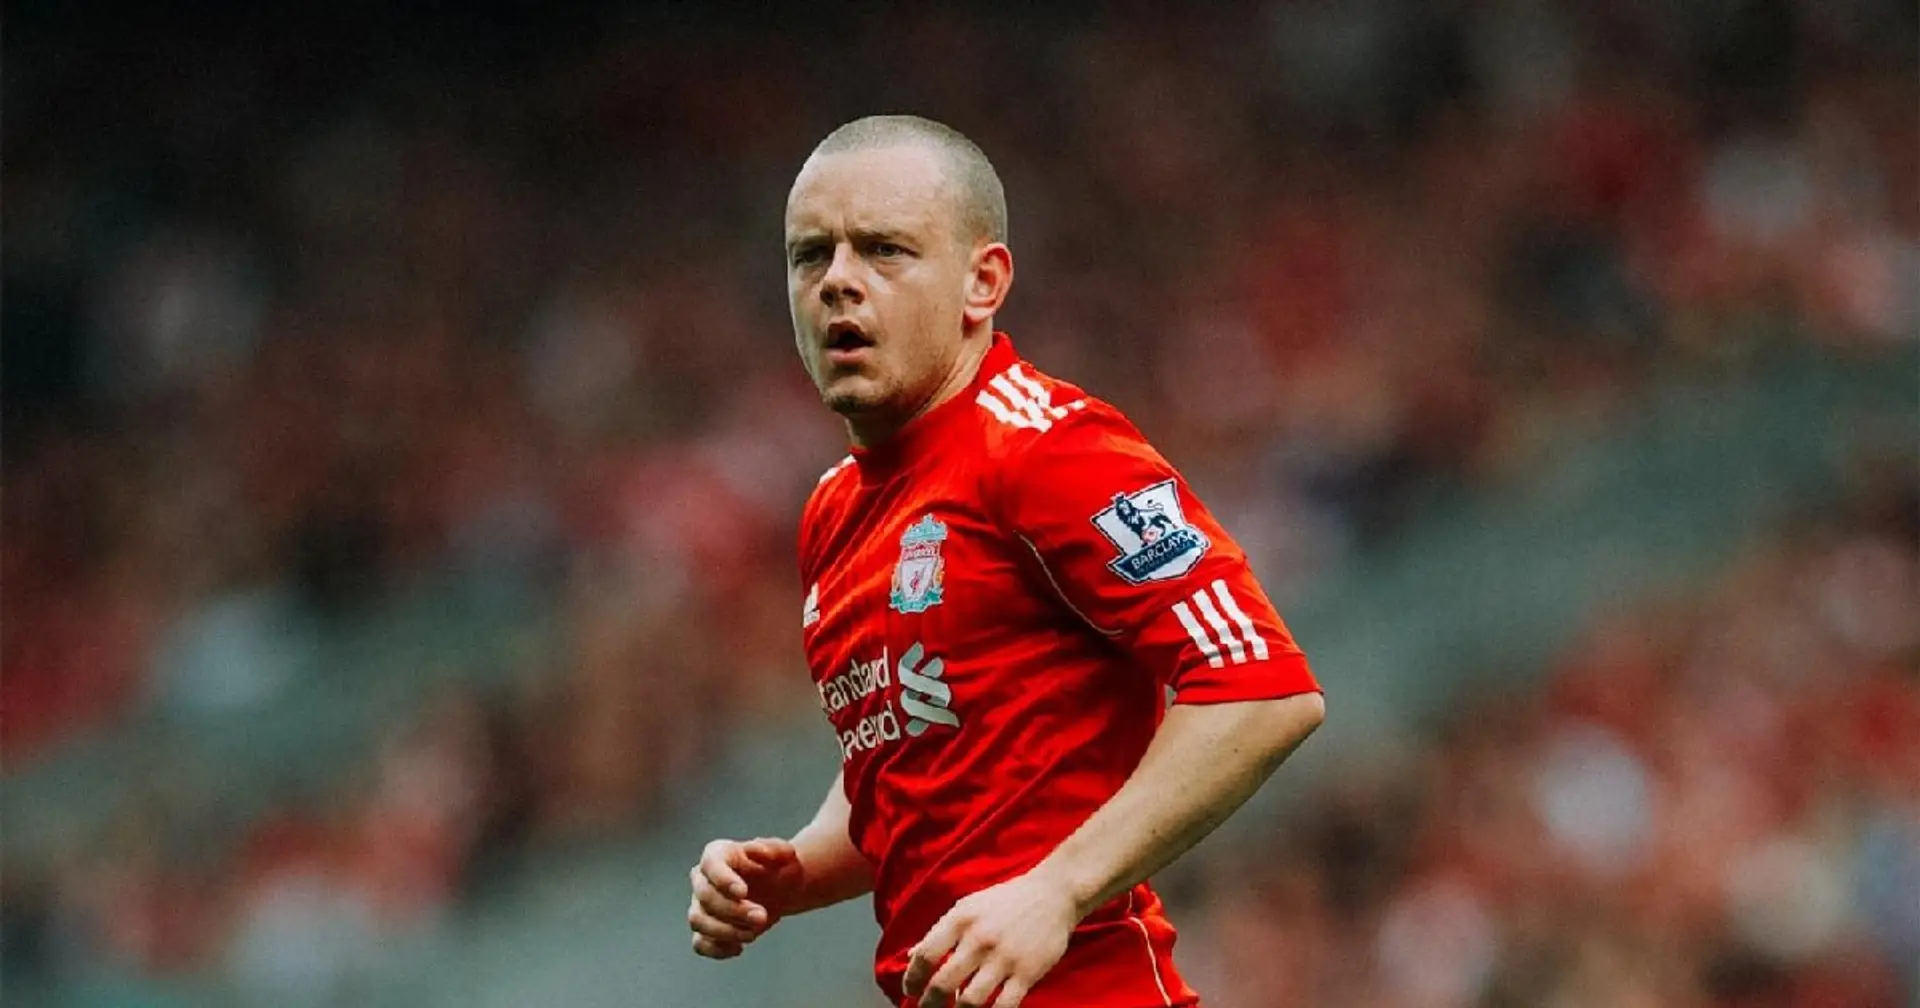 Jay Spearing rejoins Liverpool in a player-coach role